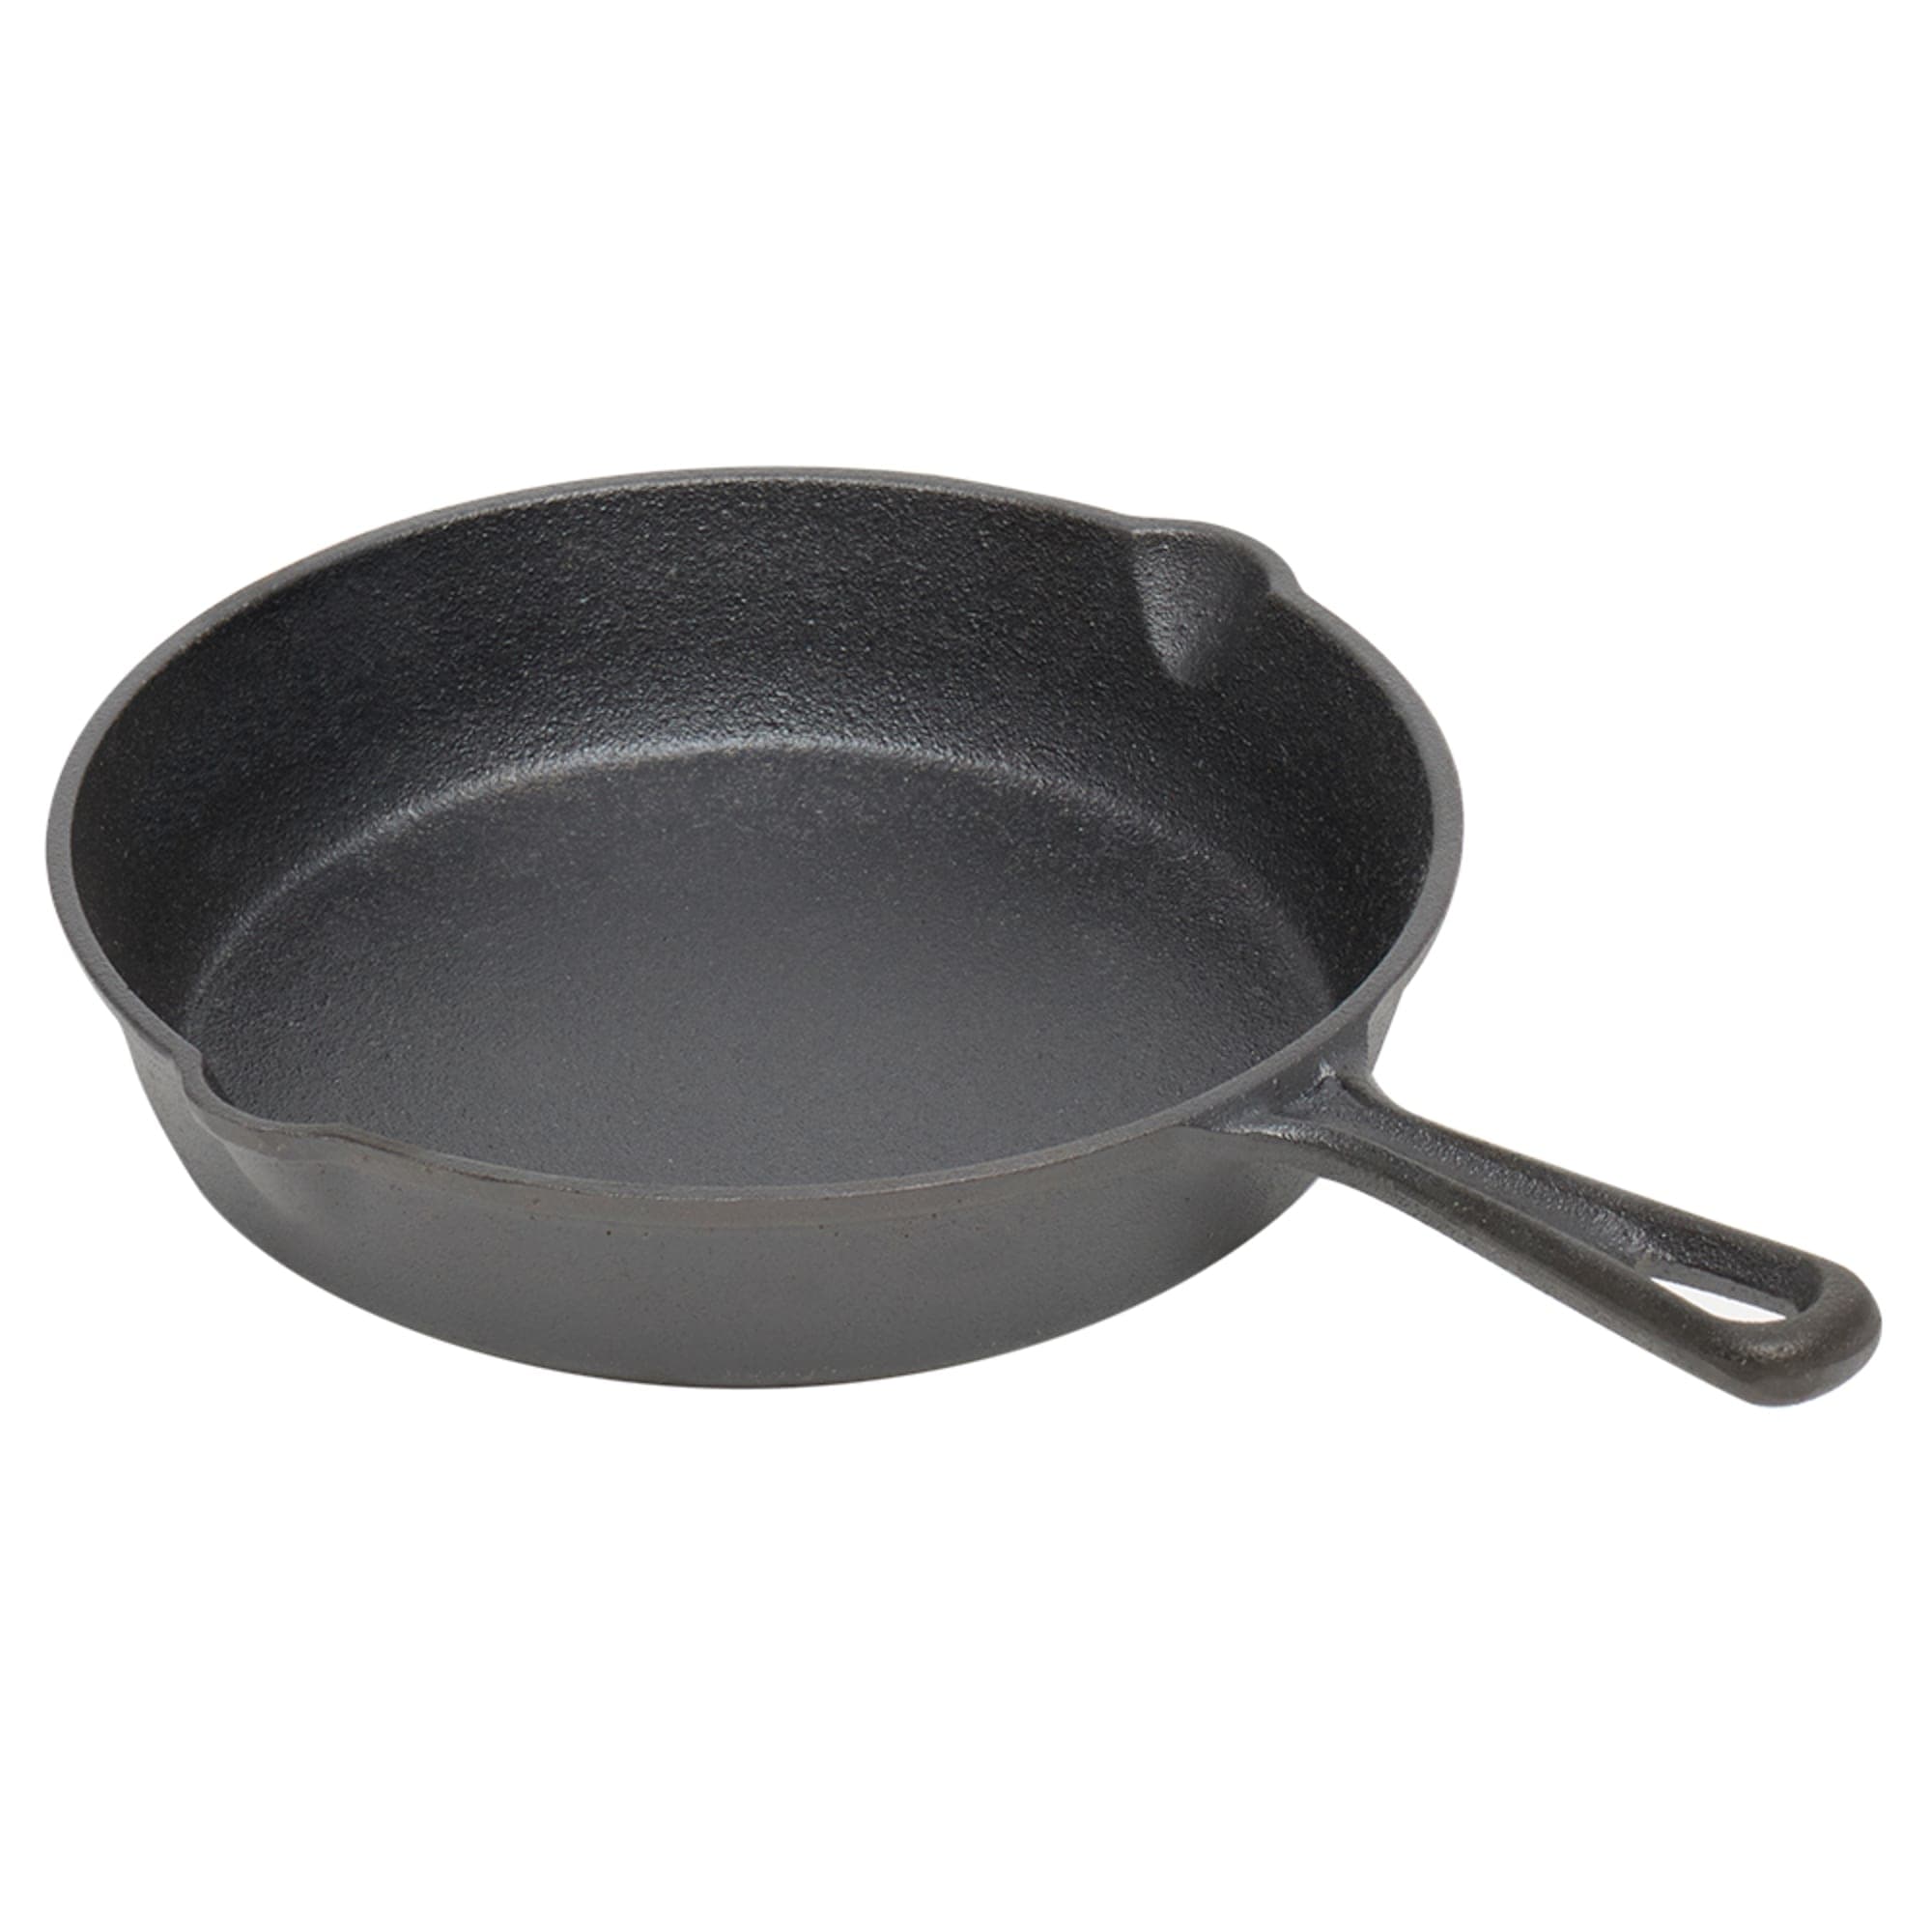 Home Basics 8-inch Pre-Seasoned Cast Iron Skillet with Pour Spouts
 $8.00 EACH, CASE PACK OF 3